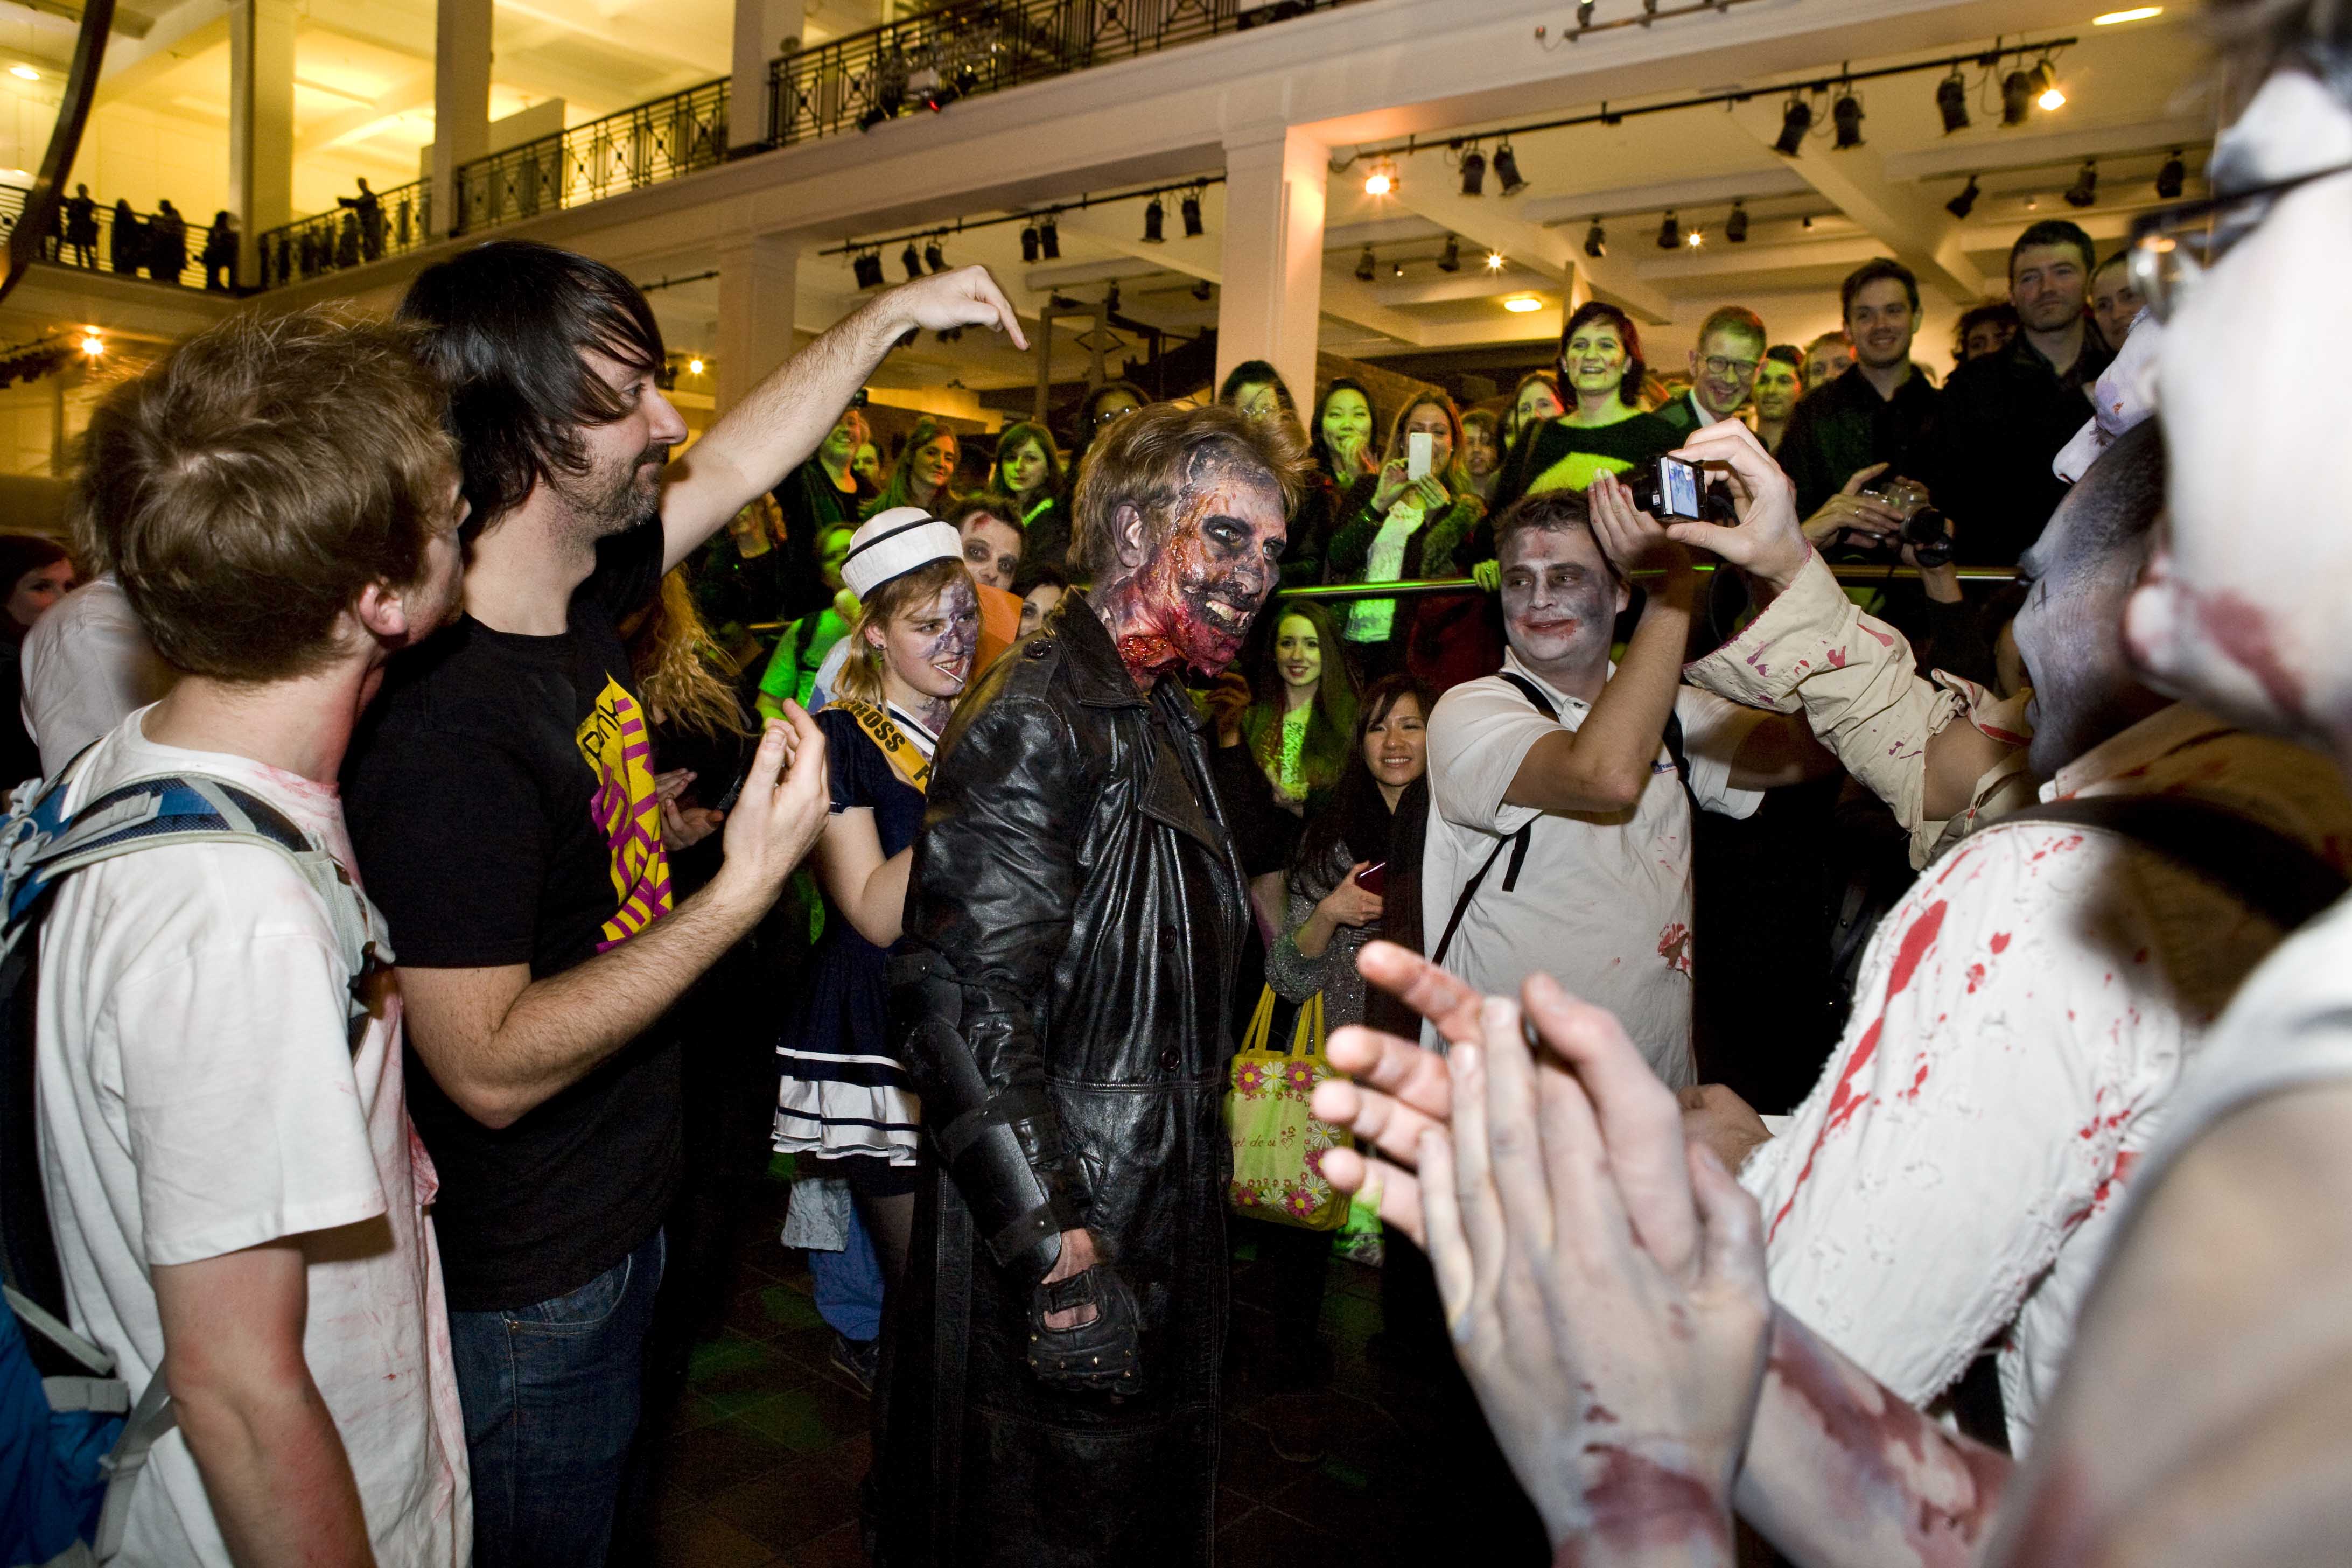 Visitors and actors dressed as Zombies at Zombie Lates, January 2013